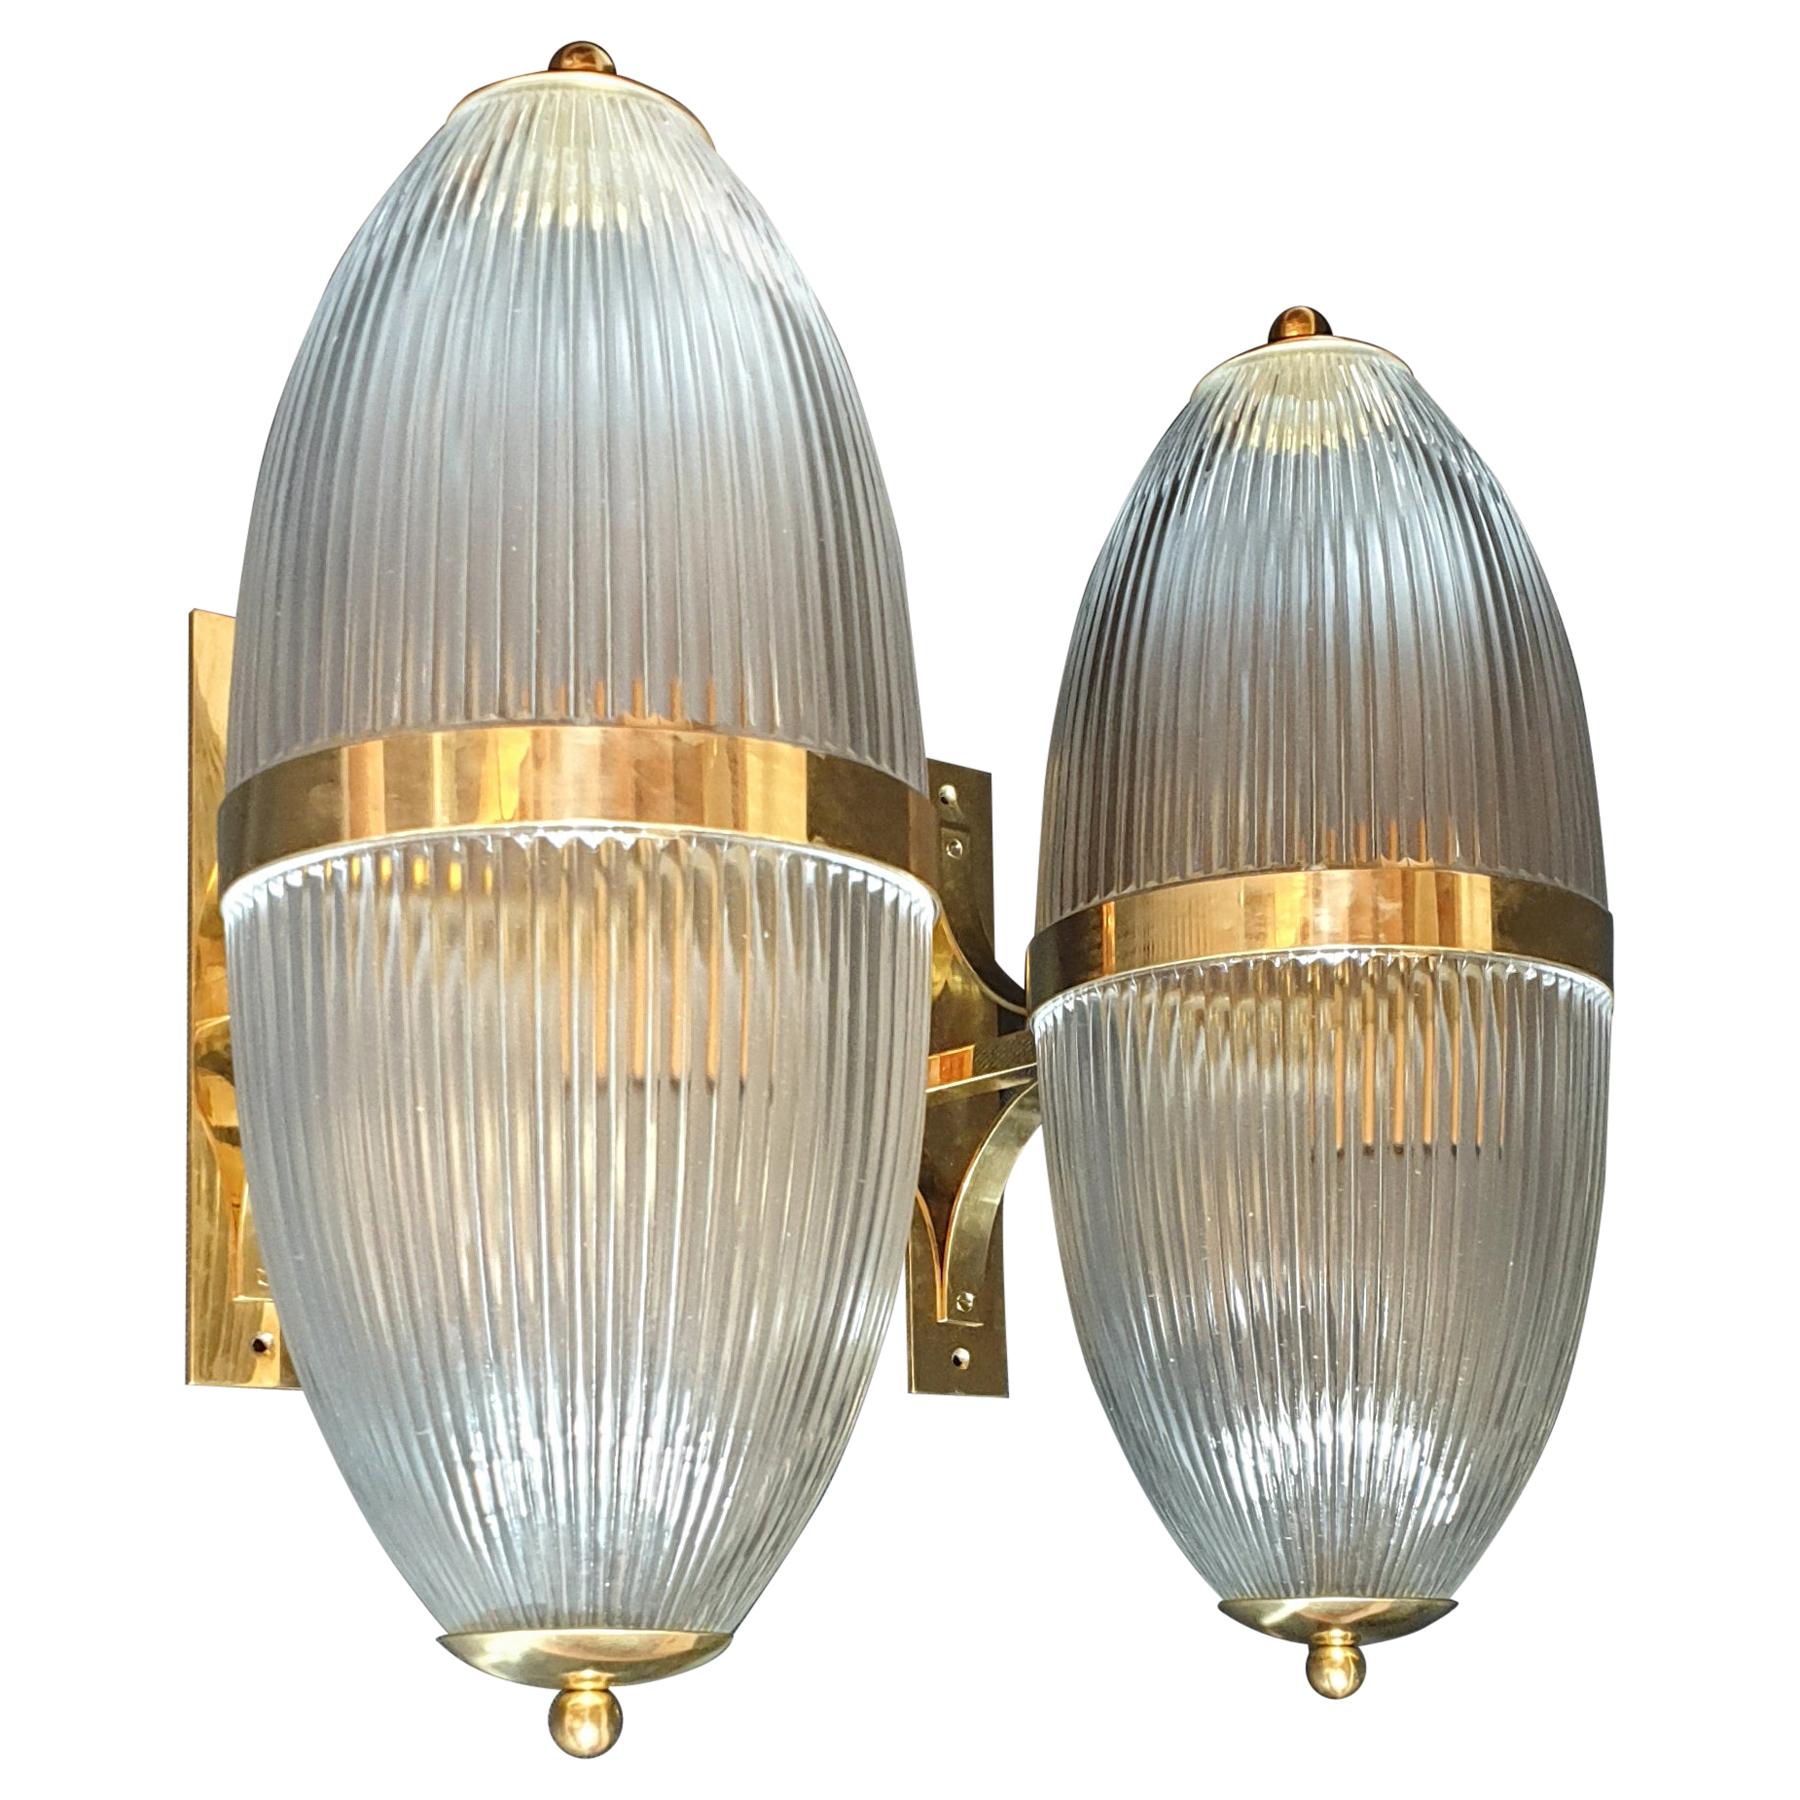 Pair of Large Mid-Century Modern Clear Glass & Brass Italian Sconces or Lanterns